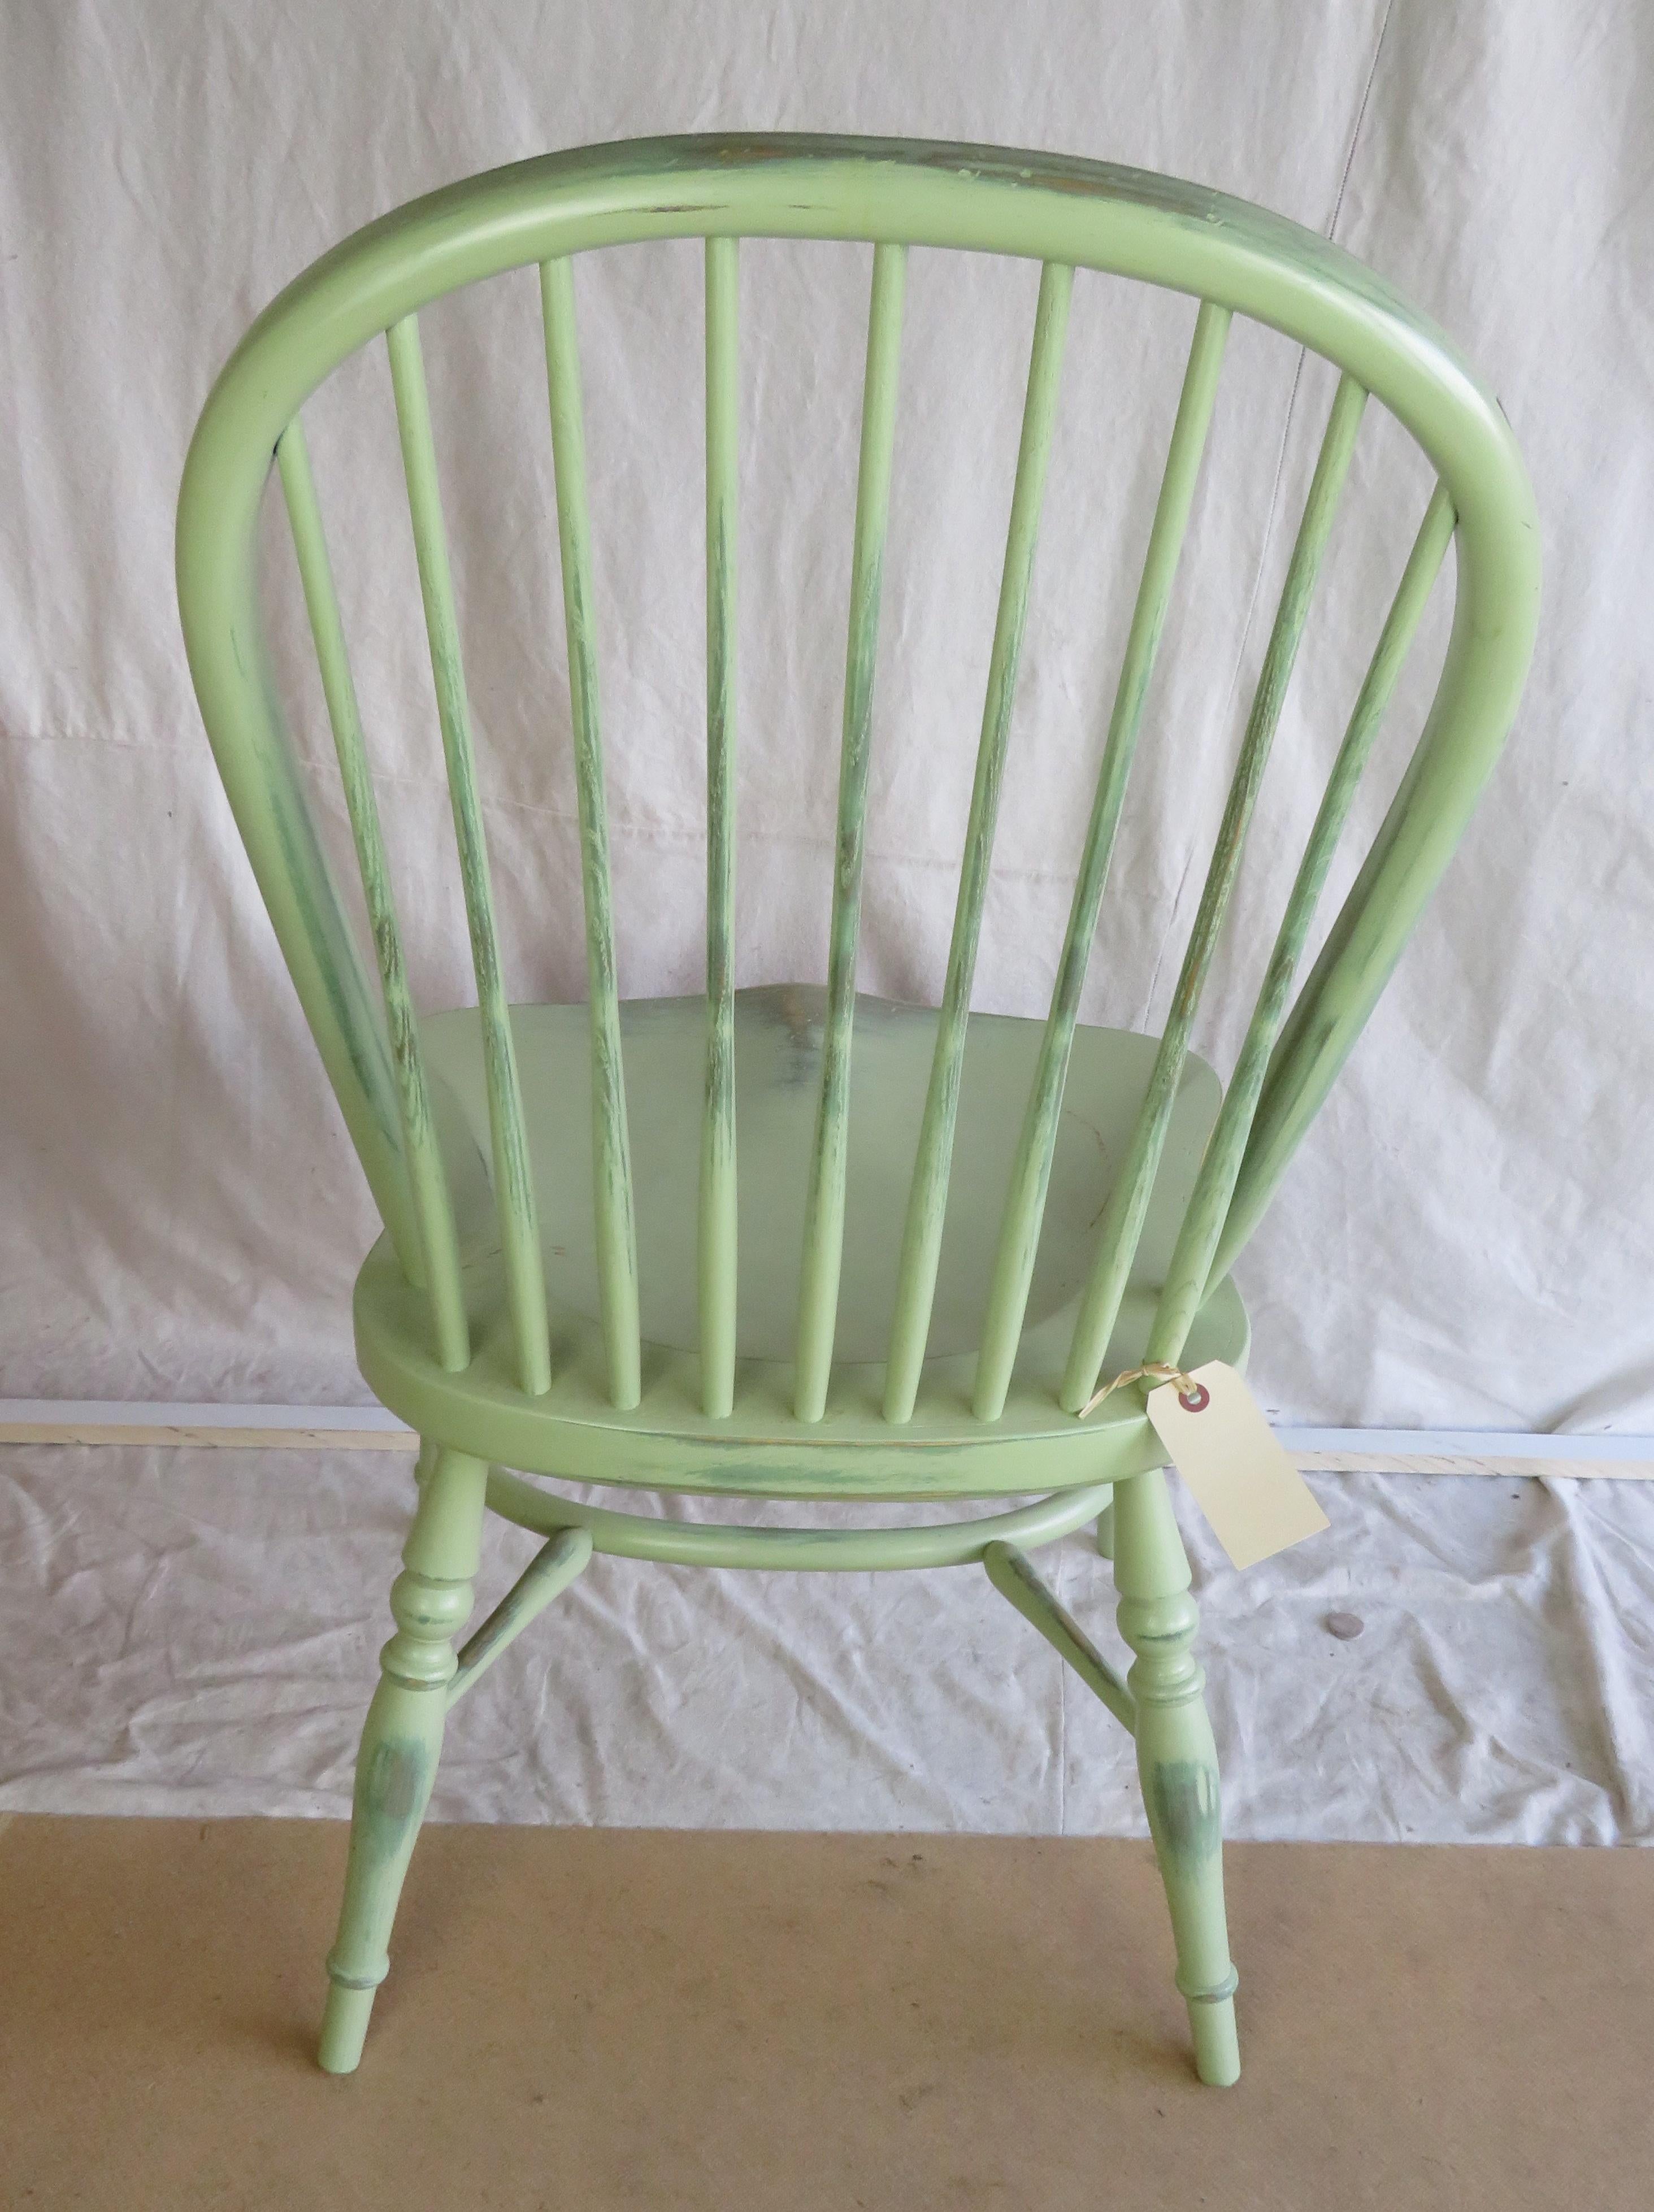 Reproduction Stick Back Side Chair in Light Green Paint In Good Condition For Sale In Nantucket, MA